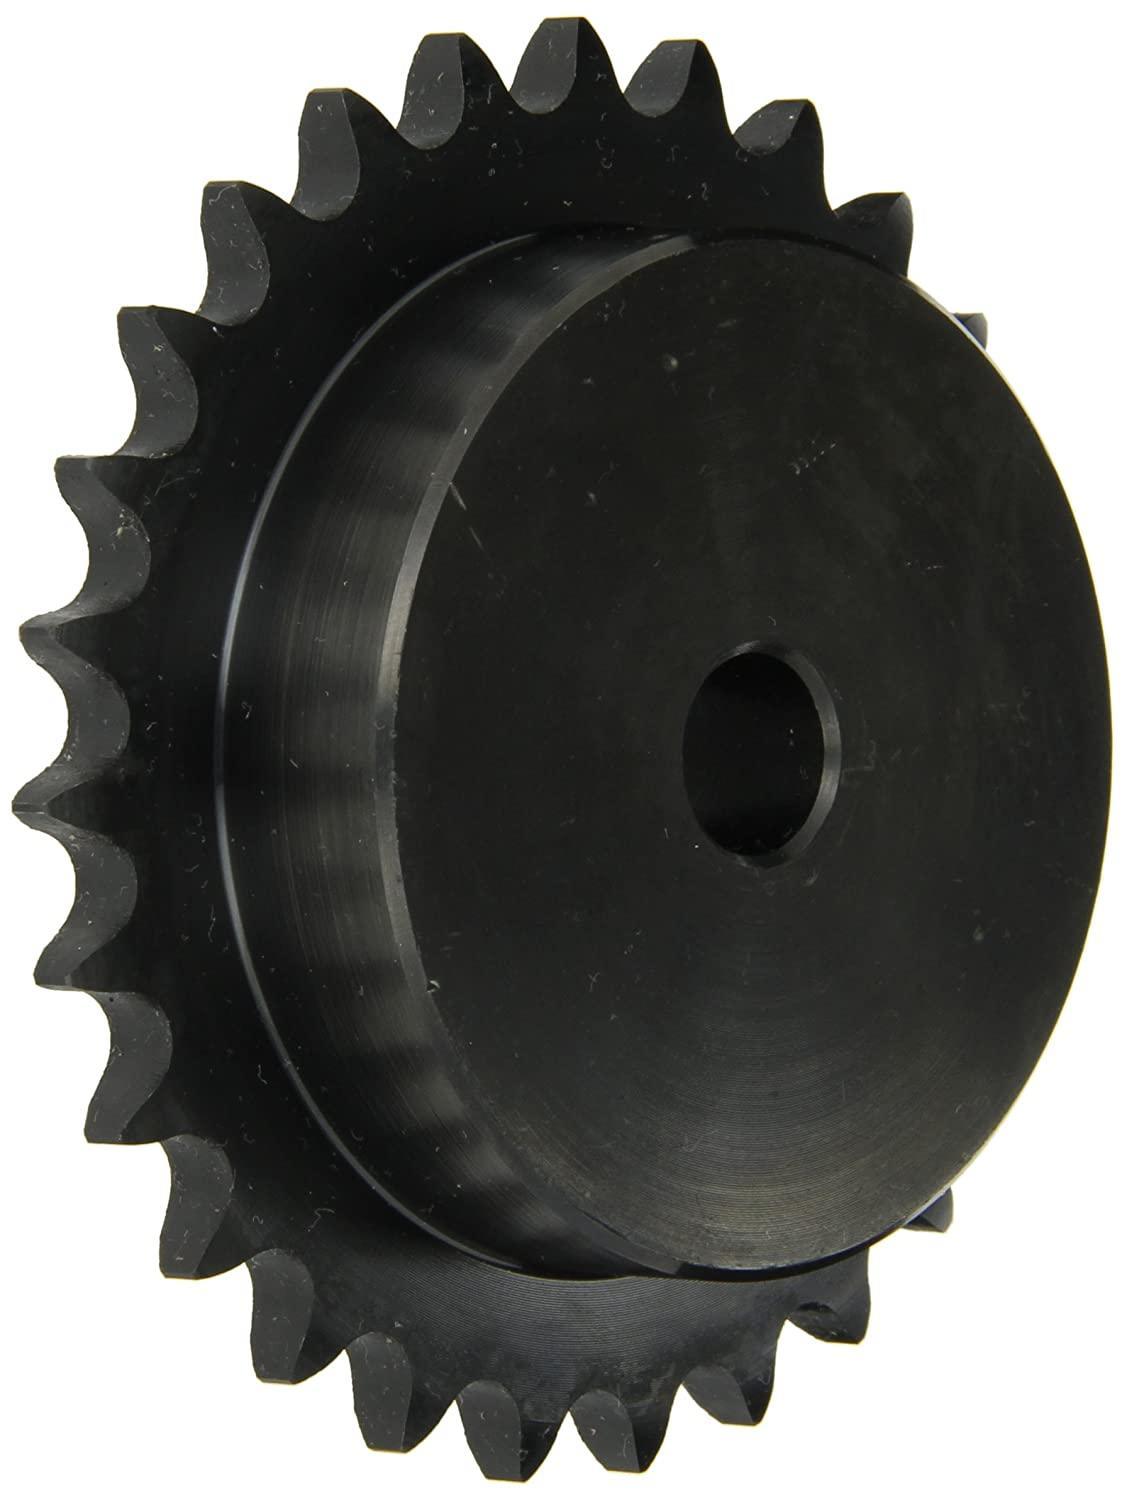 25B12 Roller Chain Sprocket With Stock Bore - Forces Inc